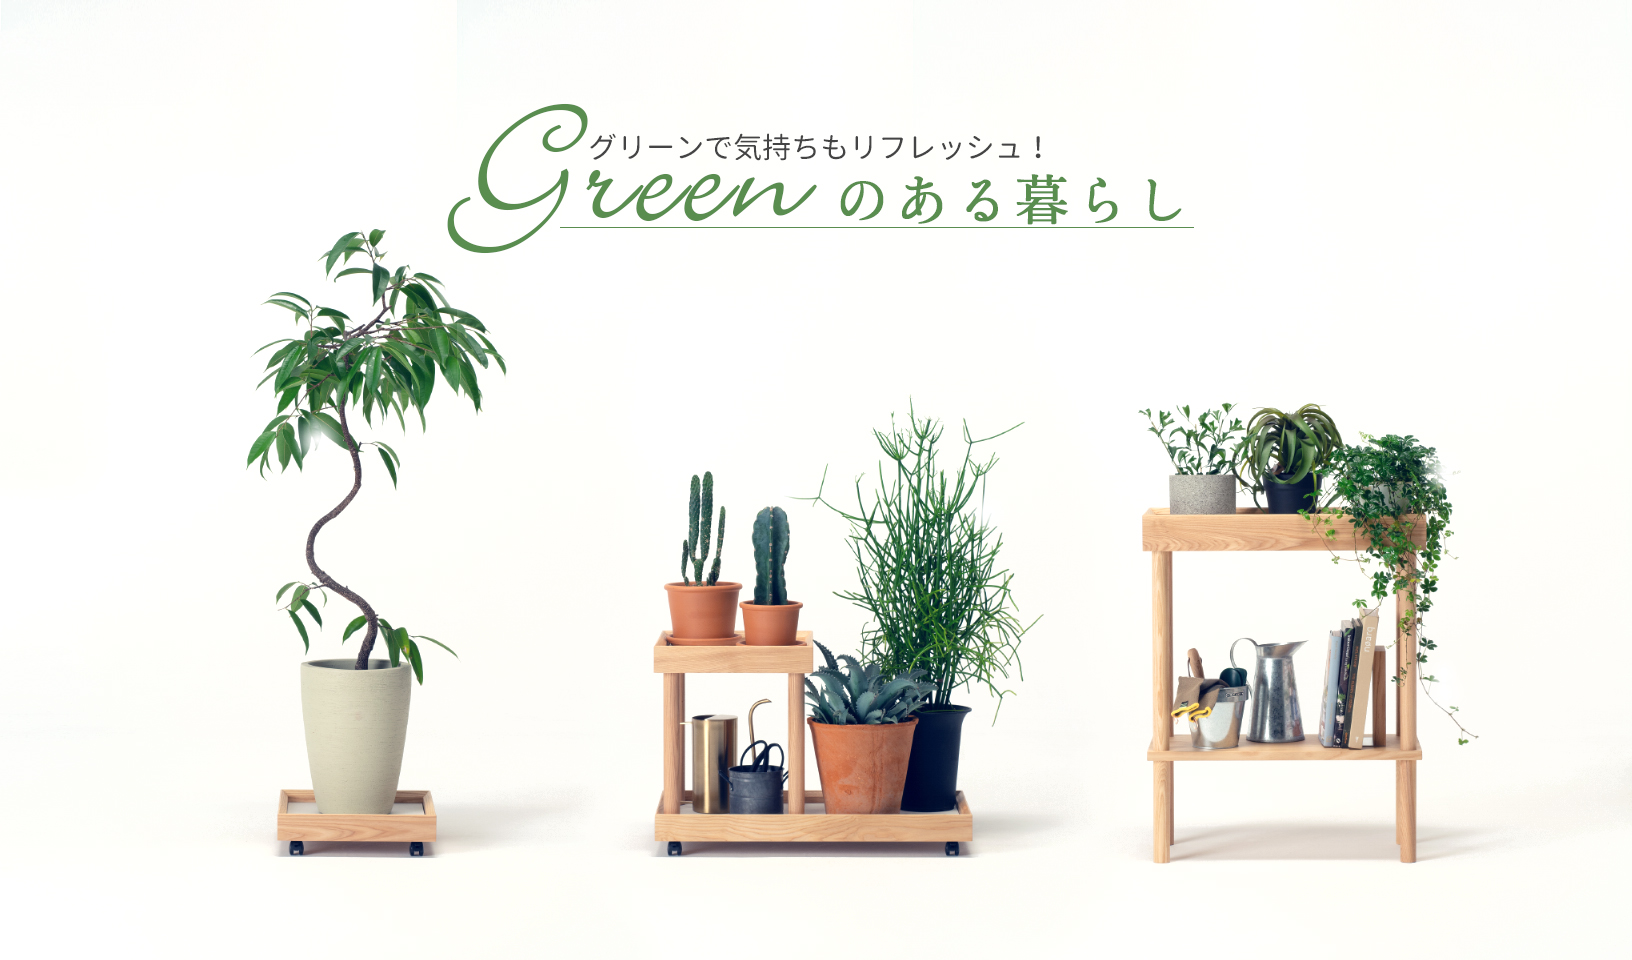 Feel refreshed with green! Living with green